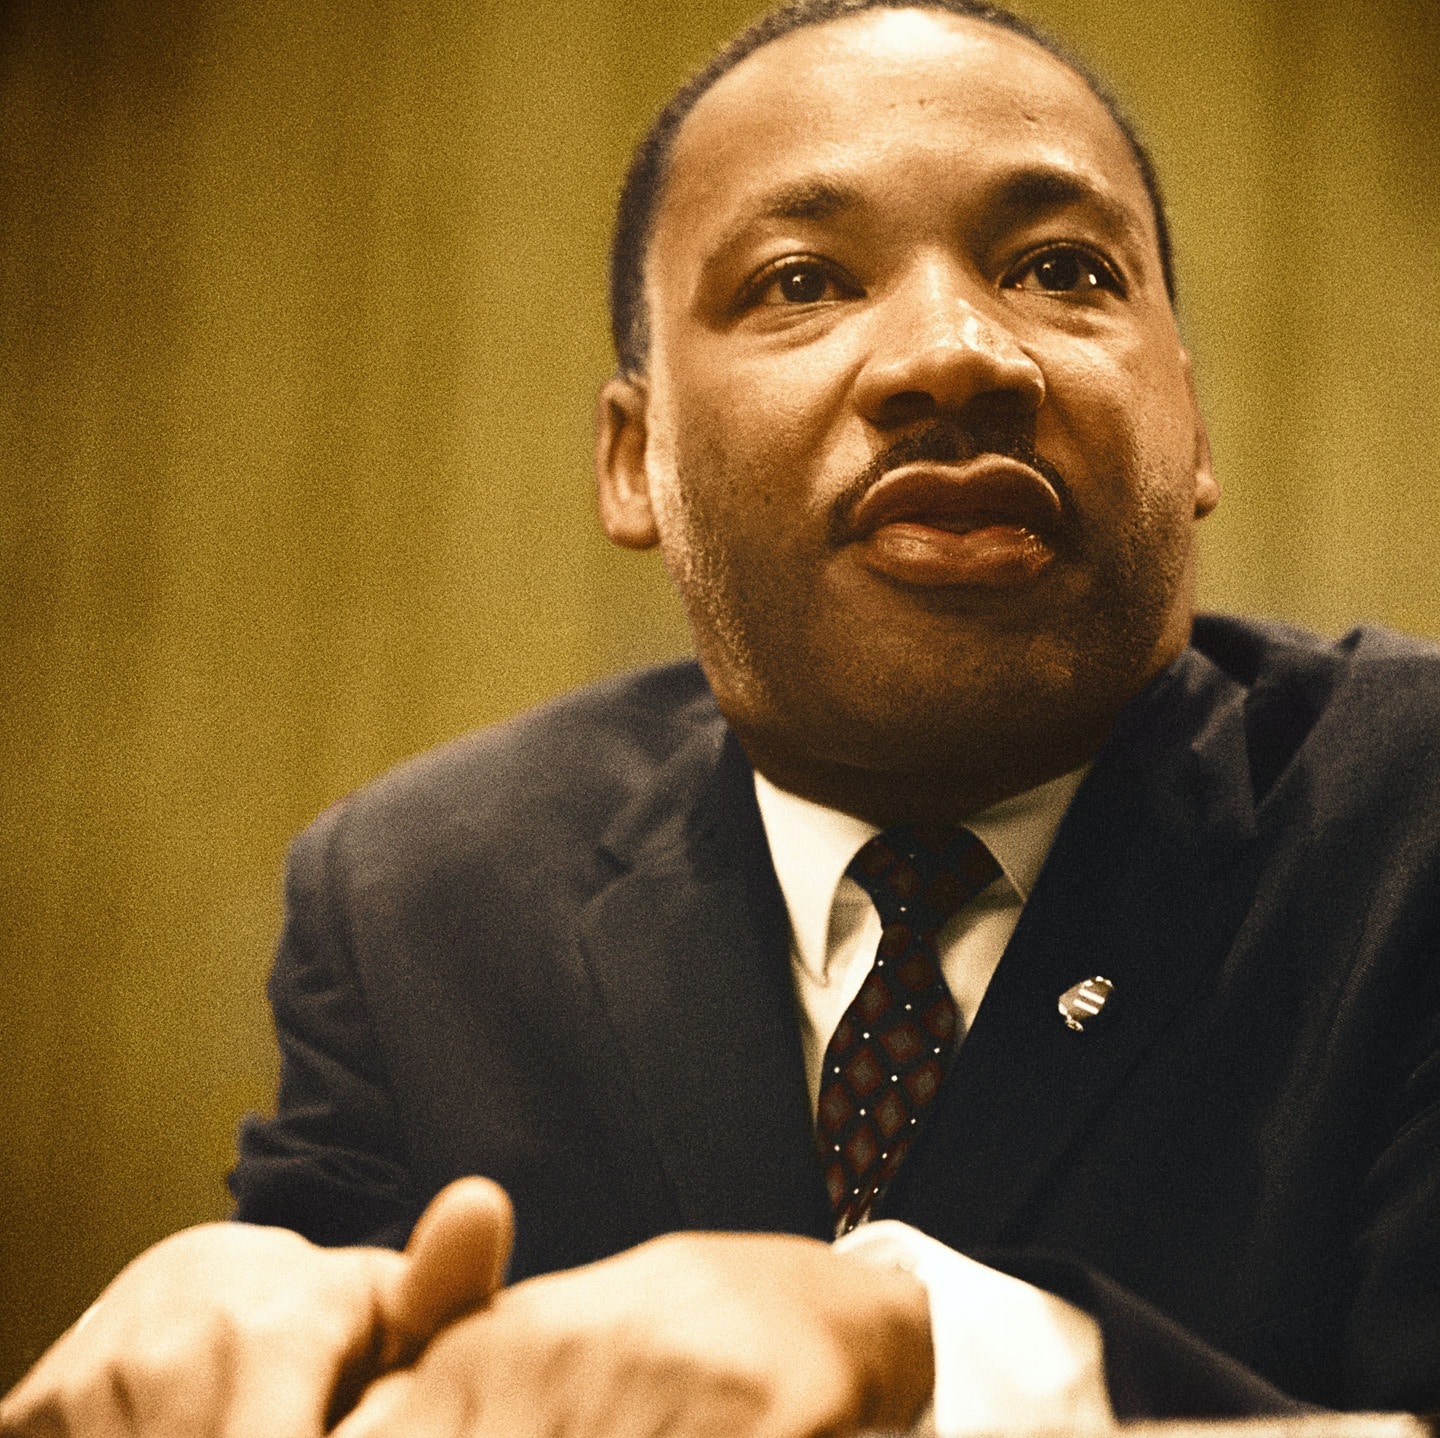 Today we honor and remember the legacy of Dr. Martin Luther King, Jr. In the words of Dr. King, “The time is always right to do what is right.” #MLKday